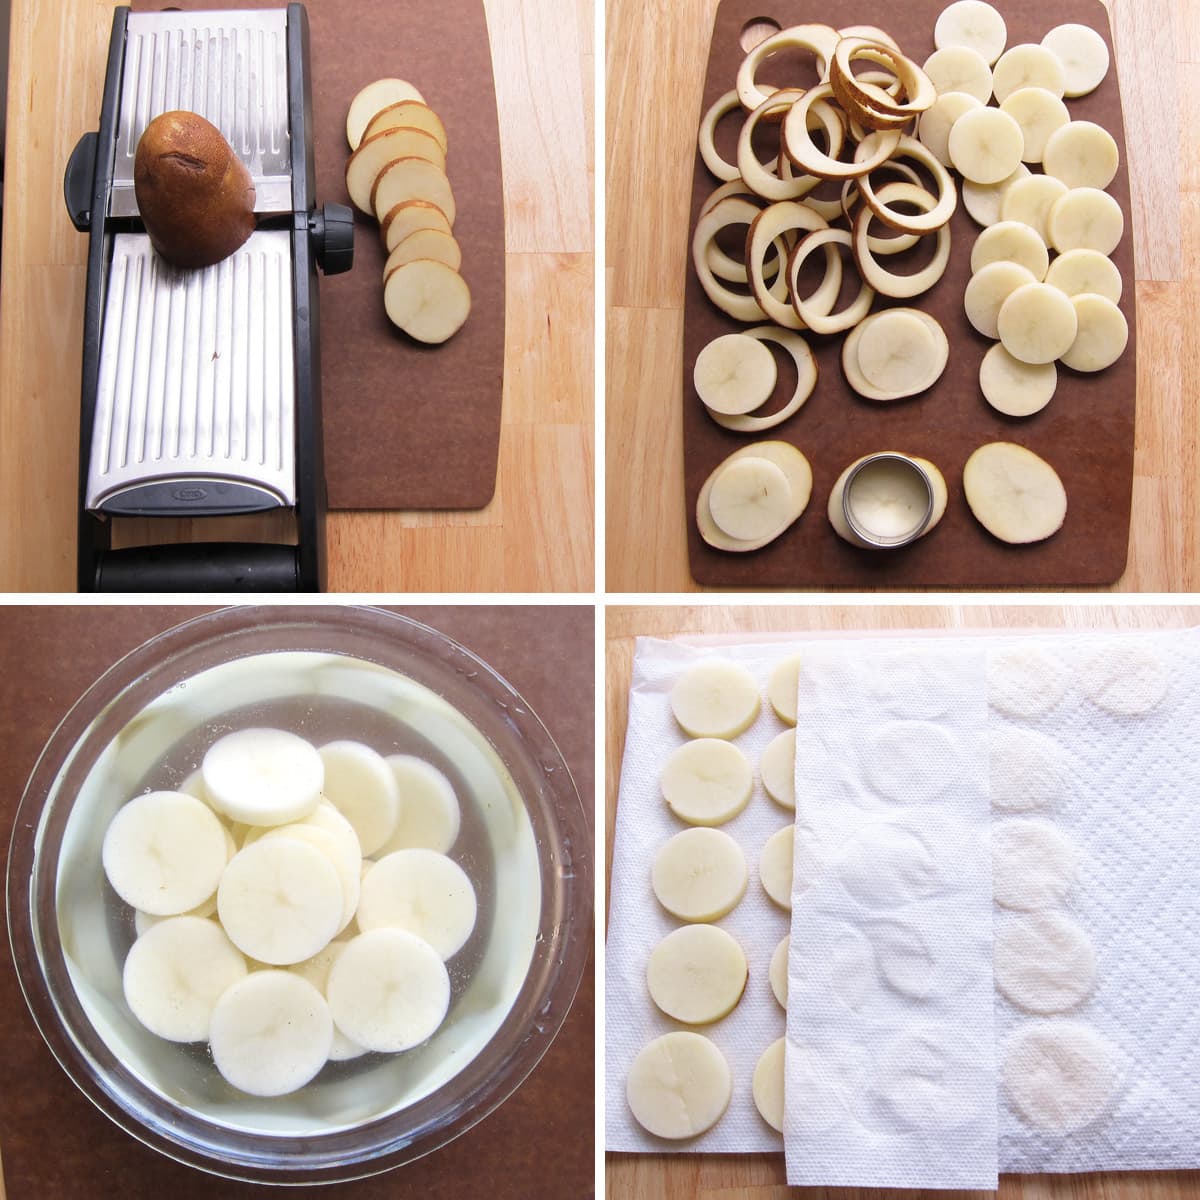 slice a potato on a mandolin then soak in water and pat dry